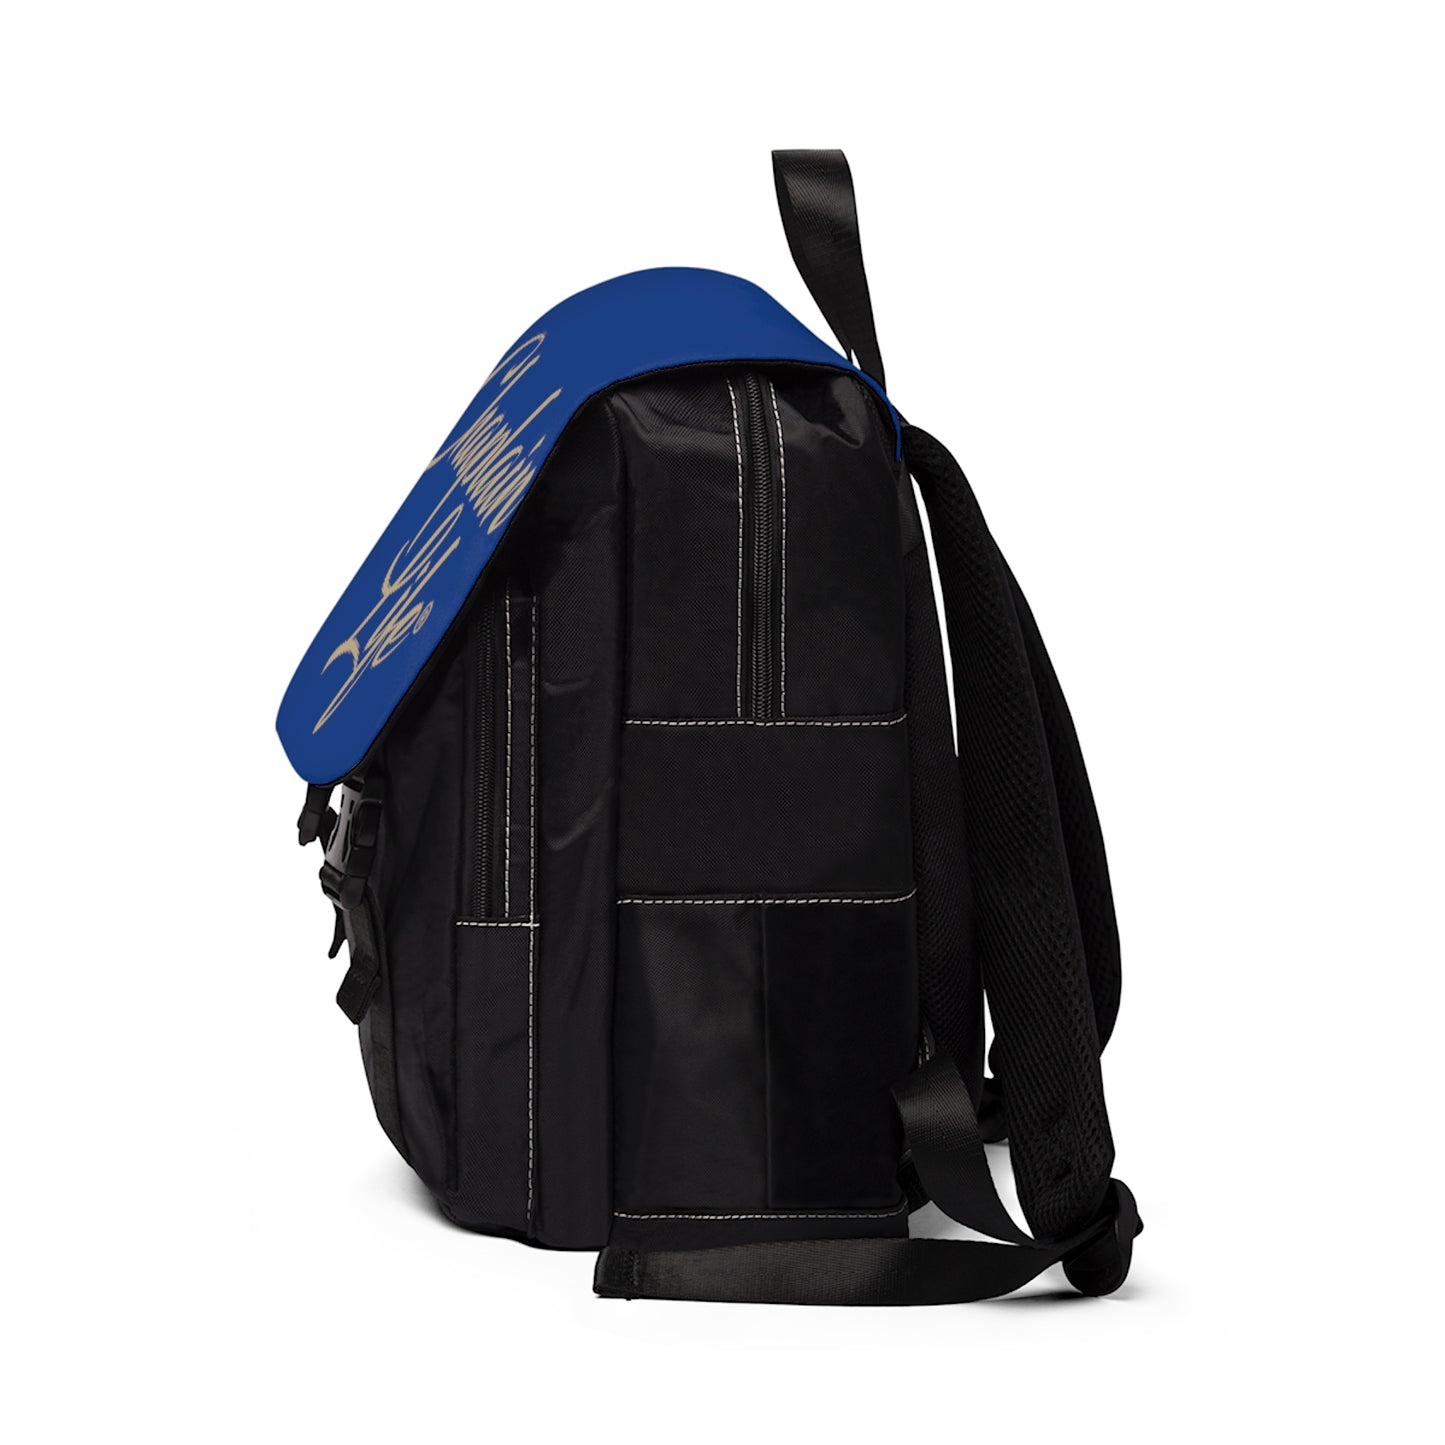 Chaplain Life ® Backpack, Gifts for Chaplains